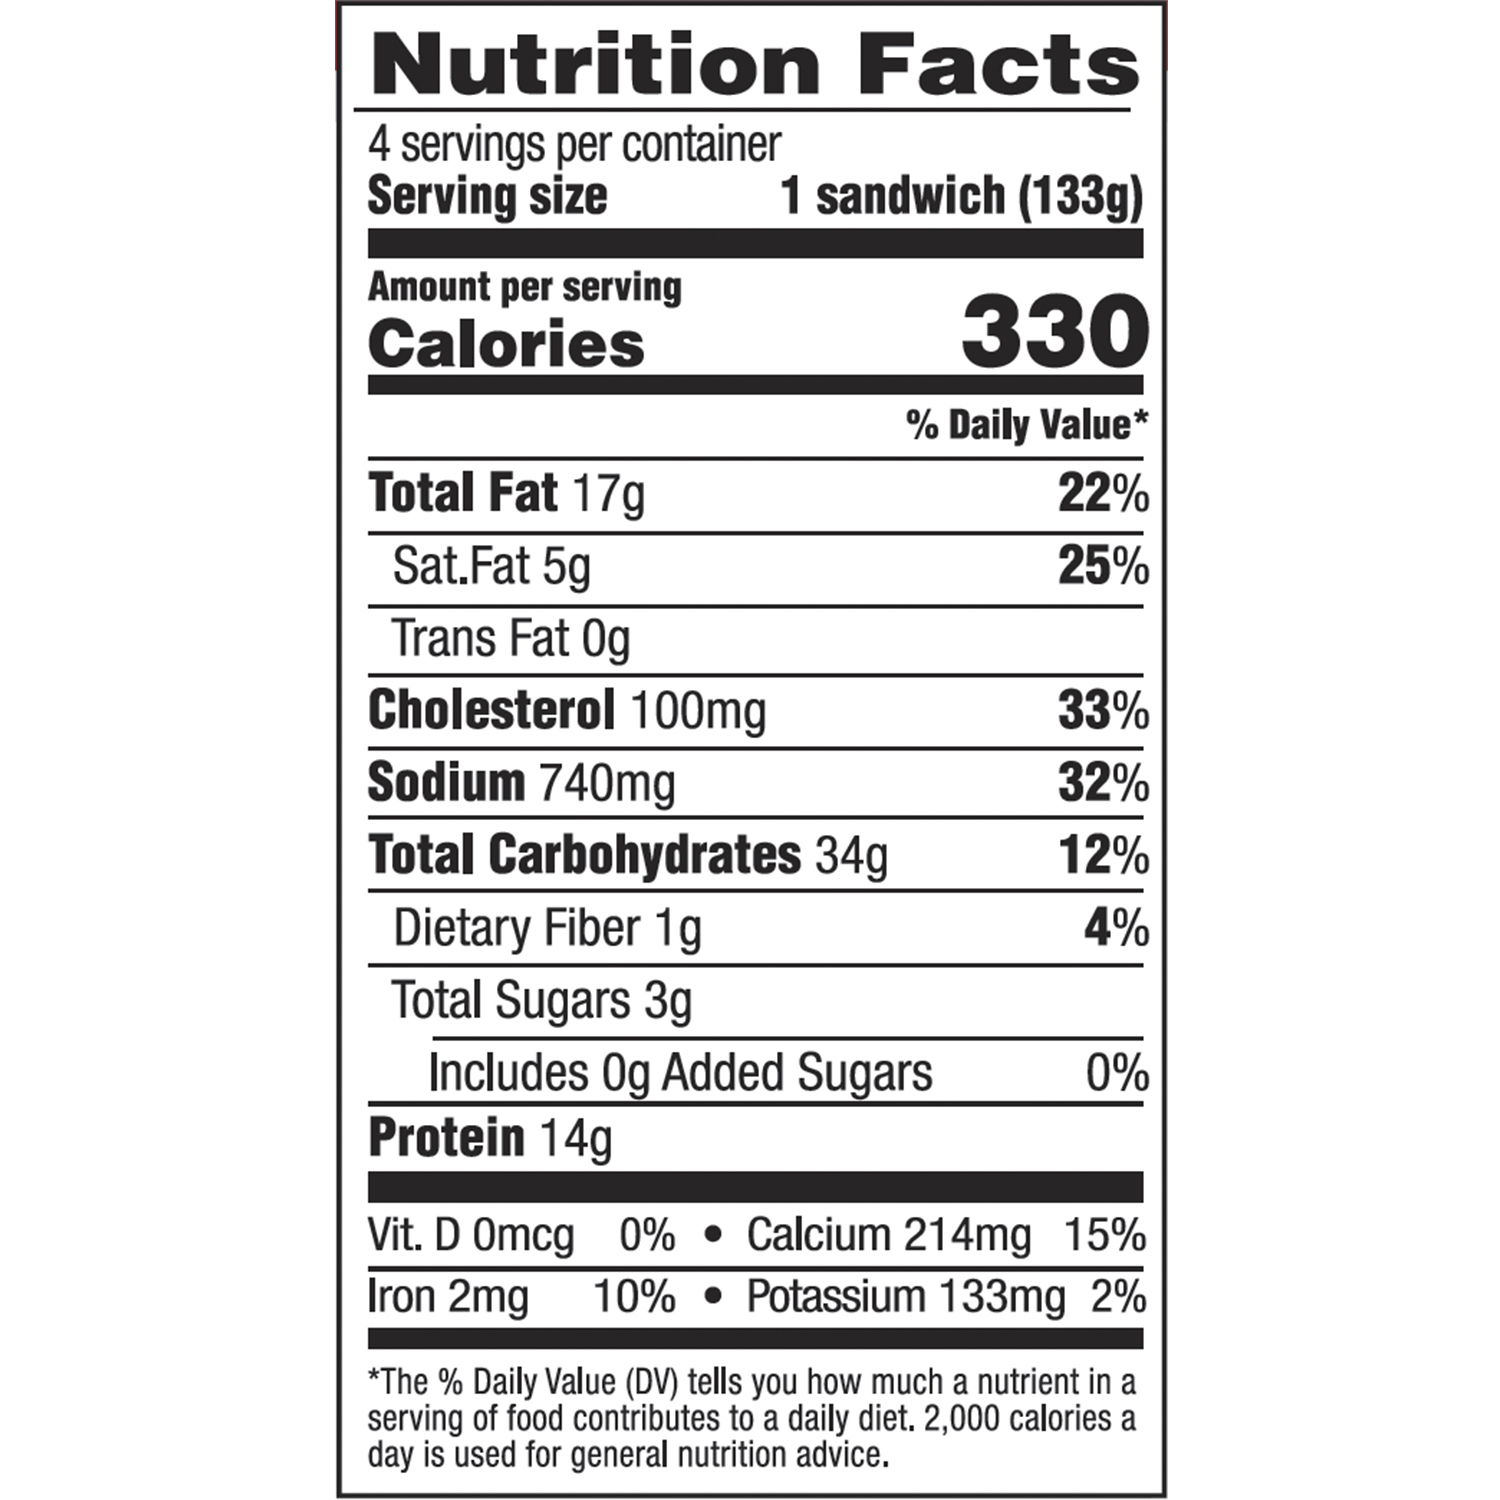 Nutrition Facts for Swaggerty's Sausage Egg and Cheese Muffin